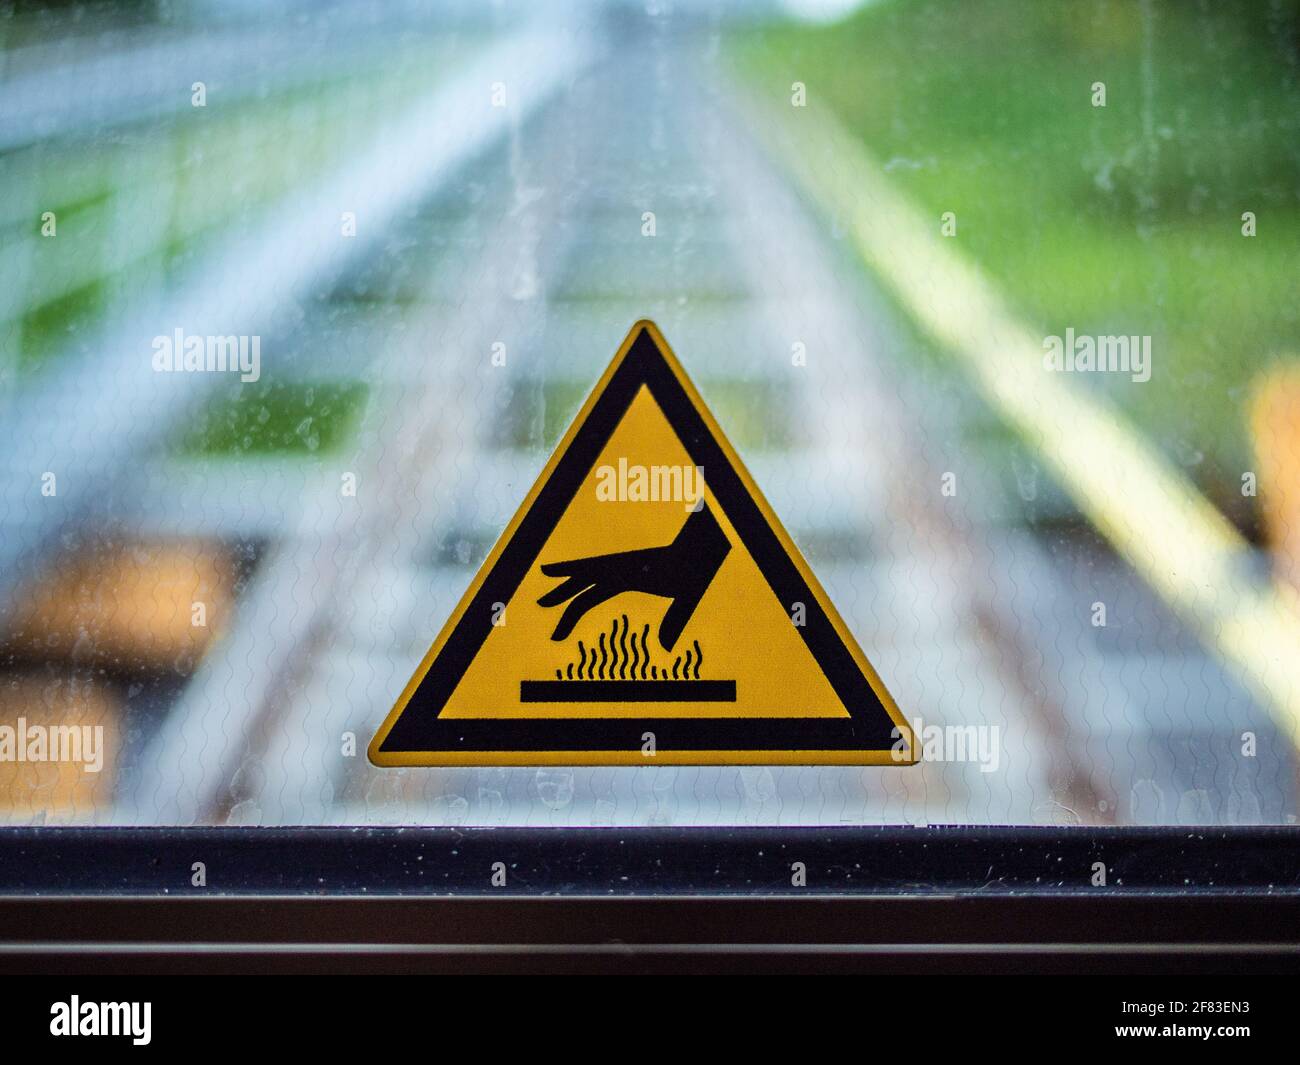 Yellow triangle shape sticker on a window with a hand and heat symbol Stock Photo